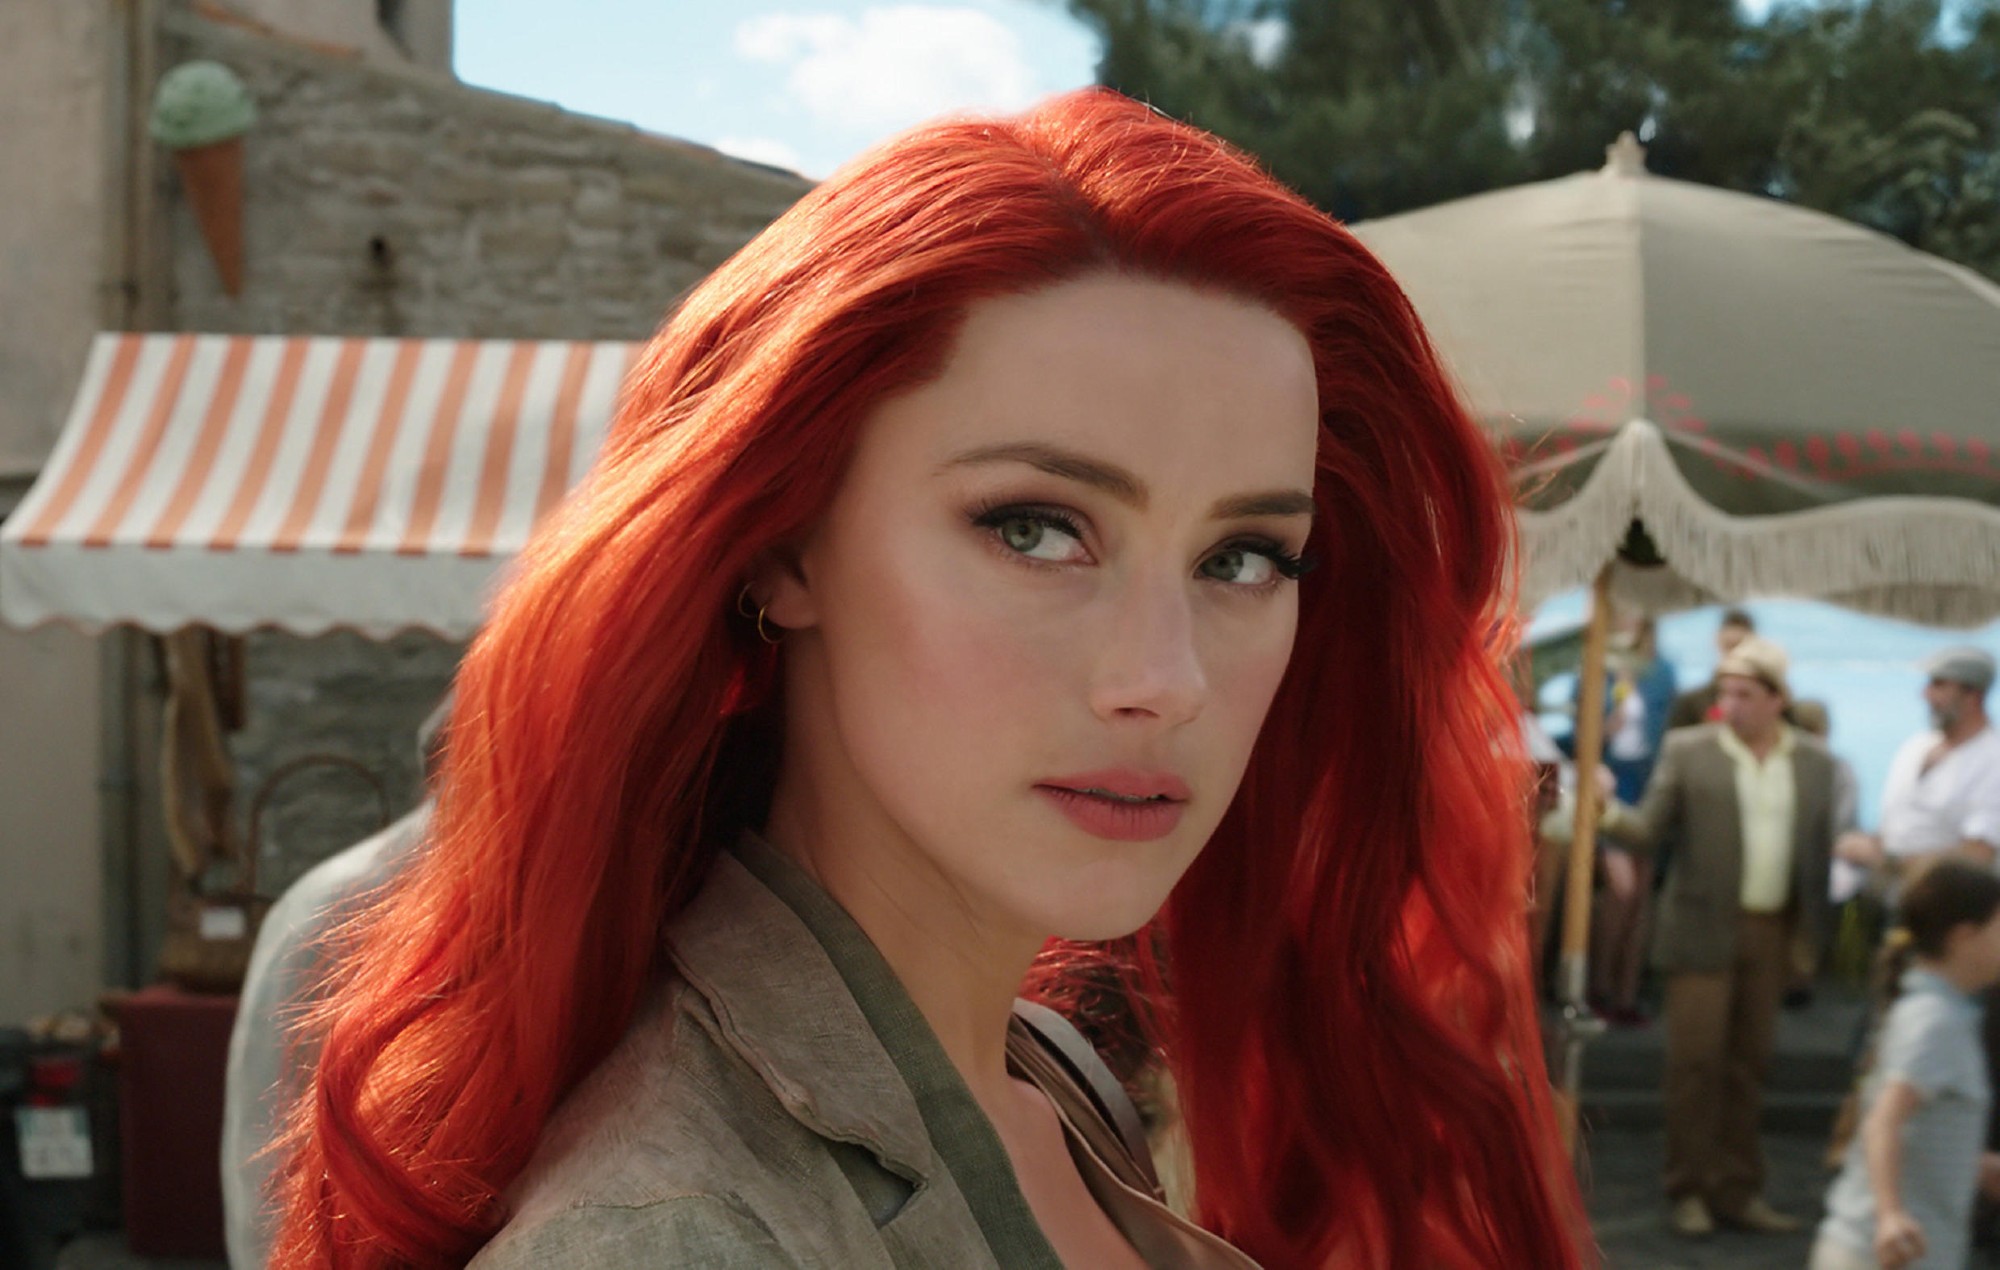 Amber Heard. I hate the Aquaman movie because everyone else is so into their roles, they are selling it. Jason Momoa is making me believe he is Arthur and then there's Amber Heard who looks and sounds like she's reading off a cue card. It's just jarring.